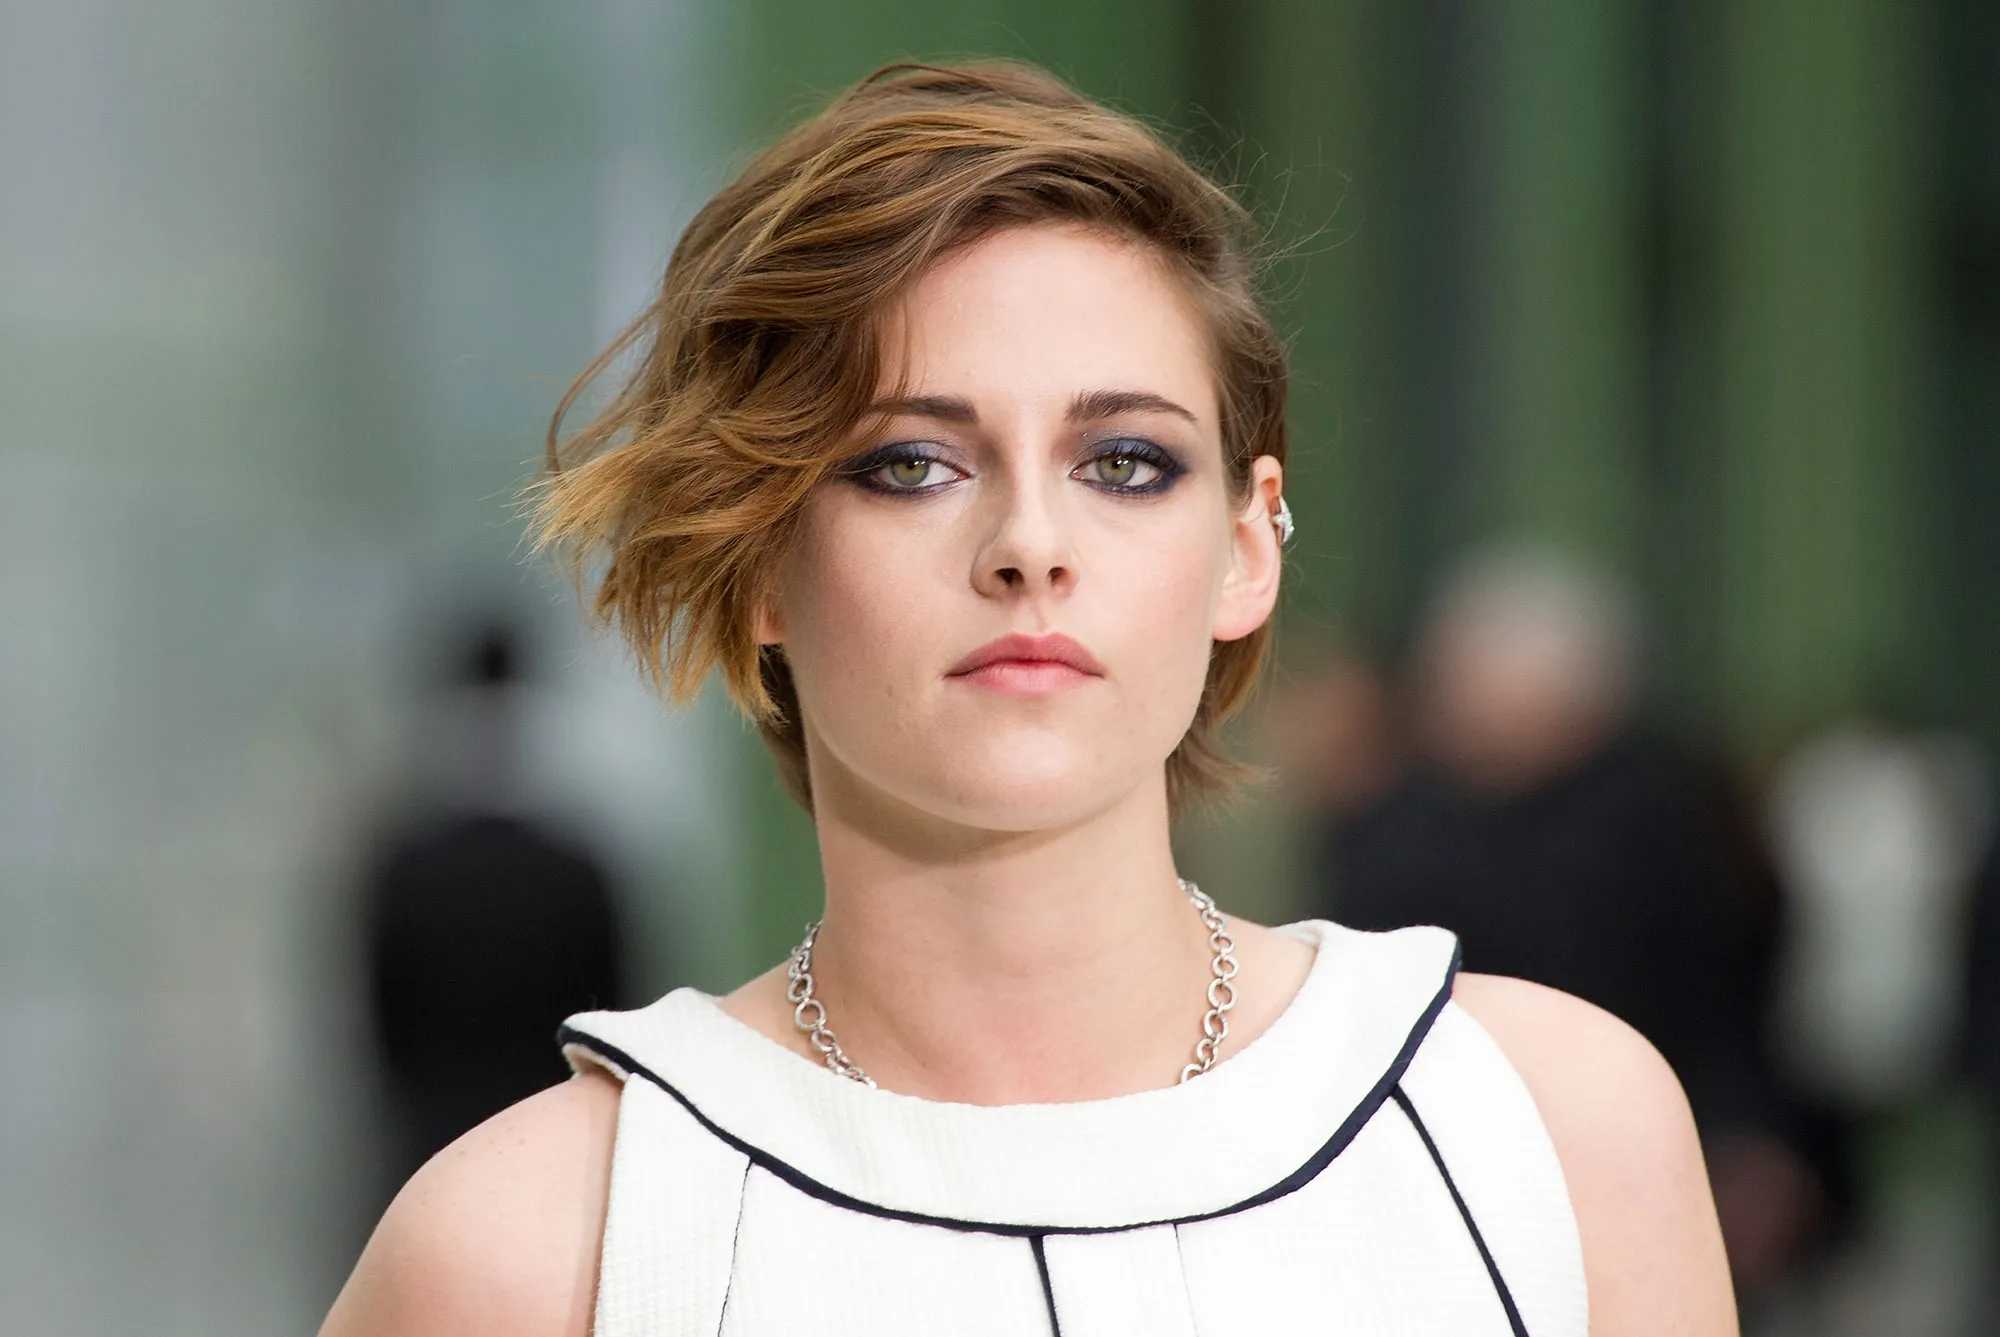 Kristen Stewart's bold coming out: A milestone for LGBTQ visibility